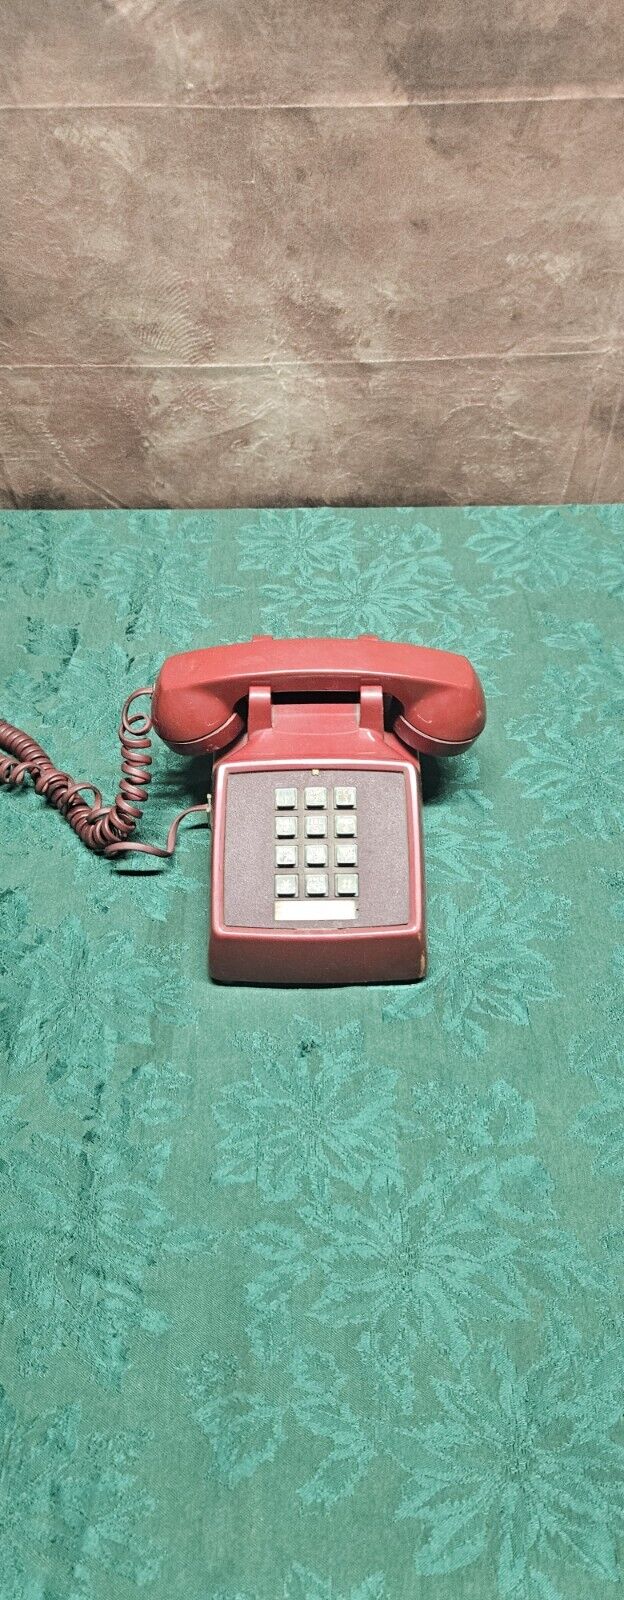 Vintage Bells System Red Push Button Telephone